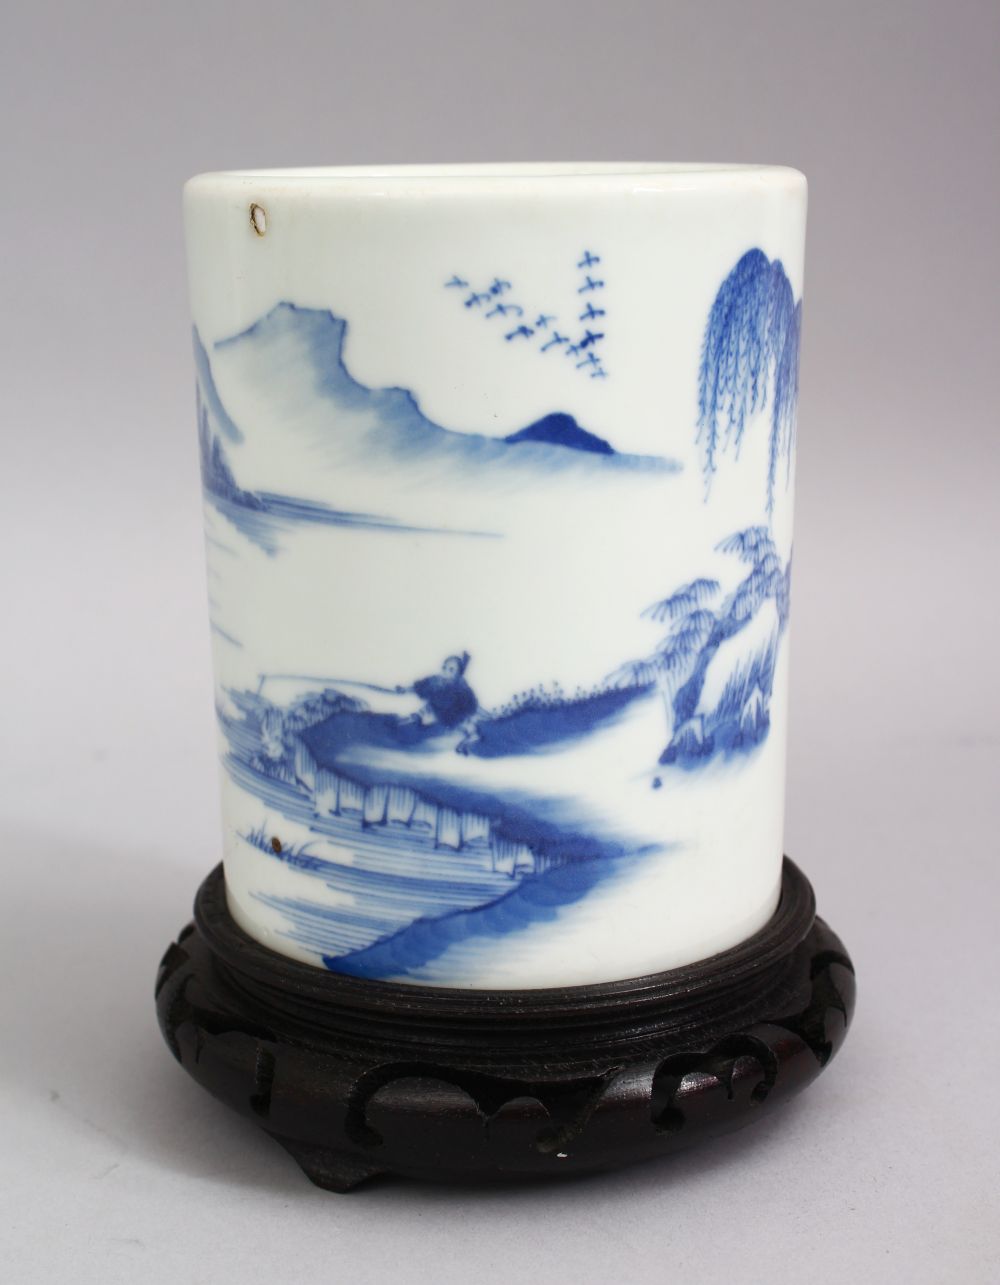 A CHINESE BLUE & WHITE PORCELAIN BRUSH WASHER & HARDWOOD STAND, The body of the pot decorated with